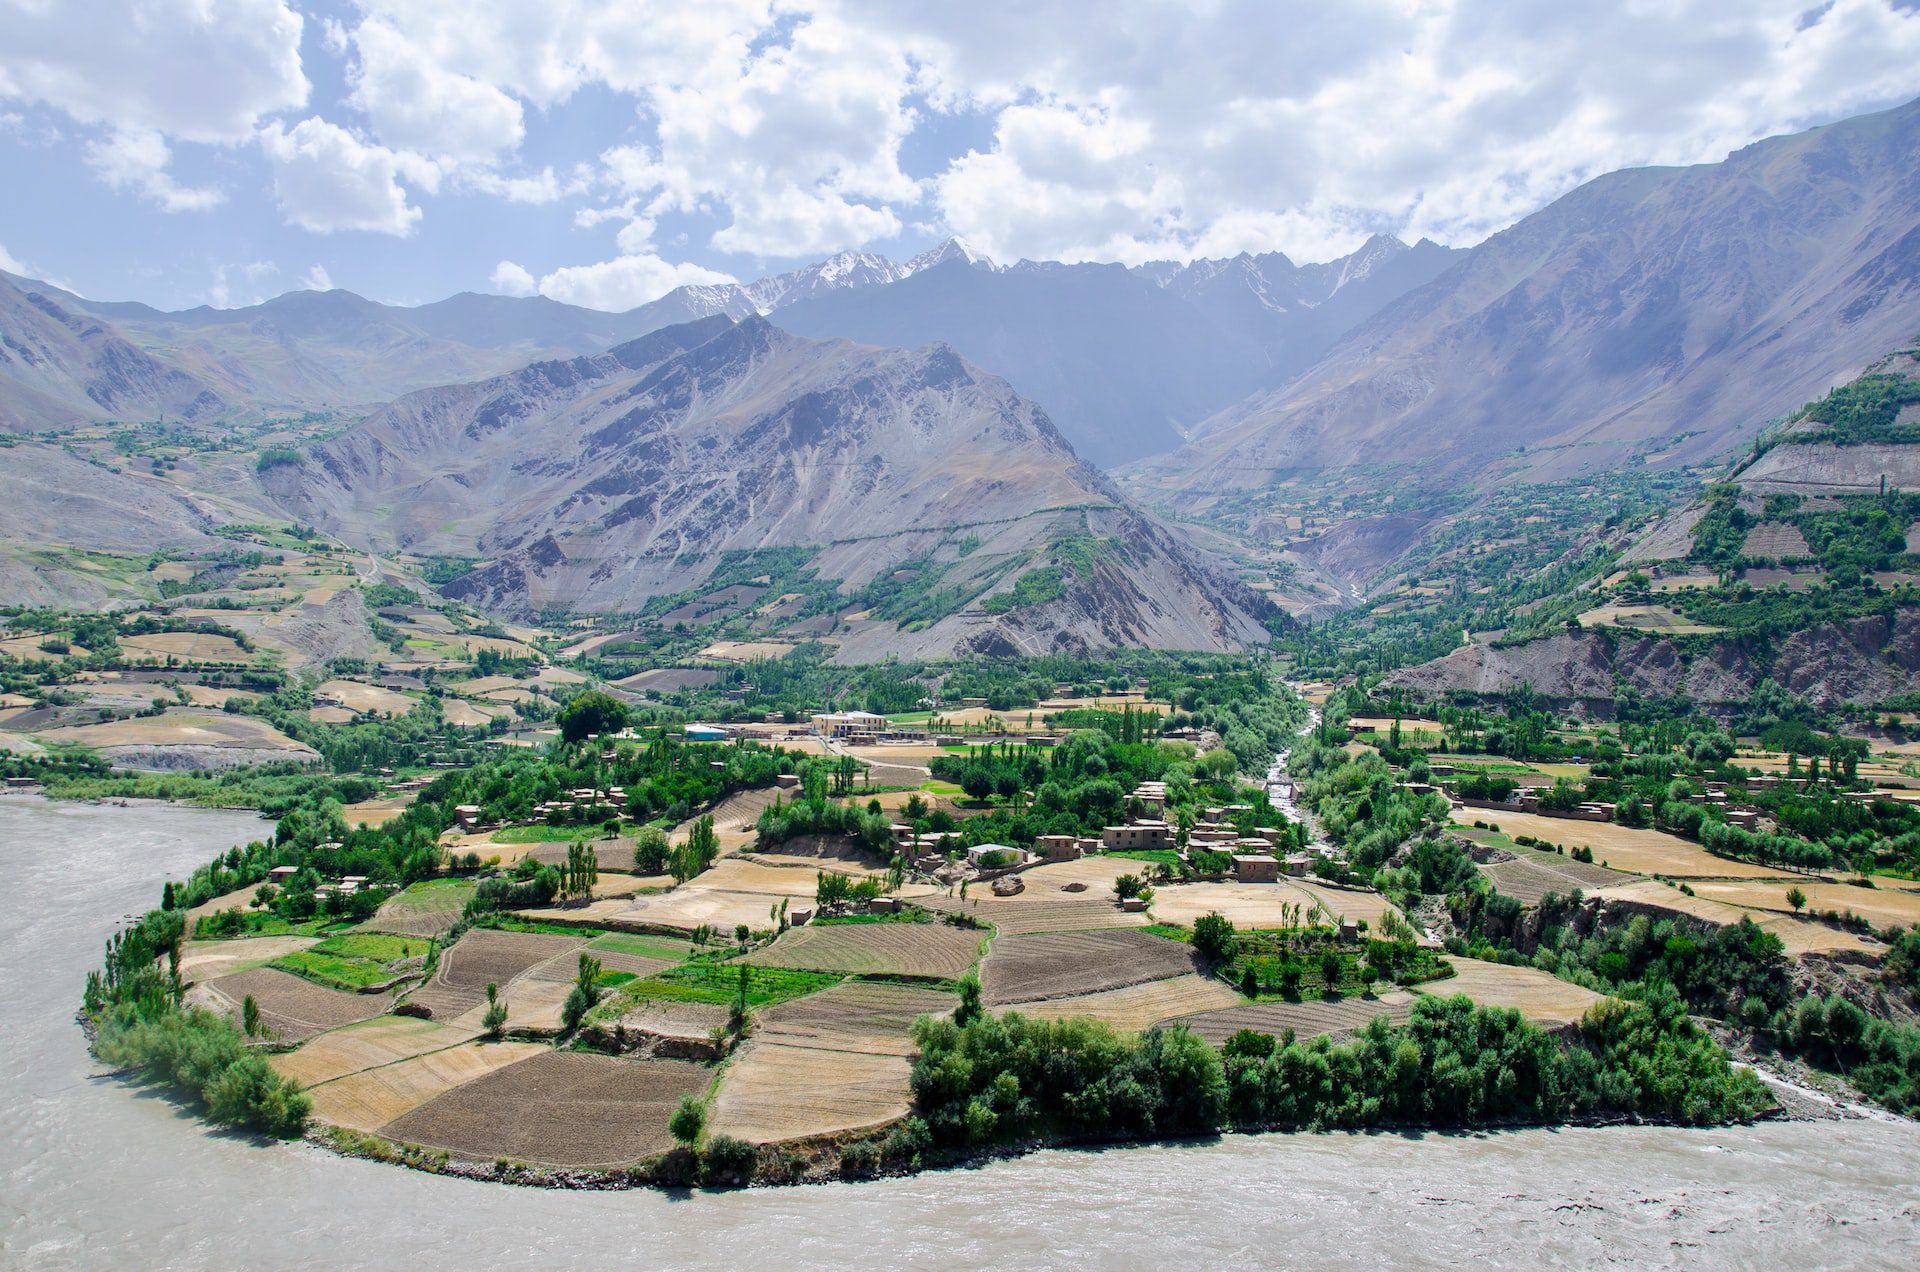 Afghanistan from the Pamir highway, Photo by EJ Wolfson on Unsplash.